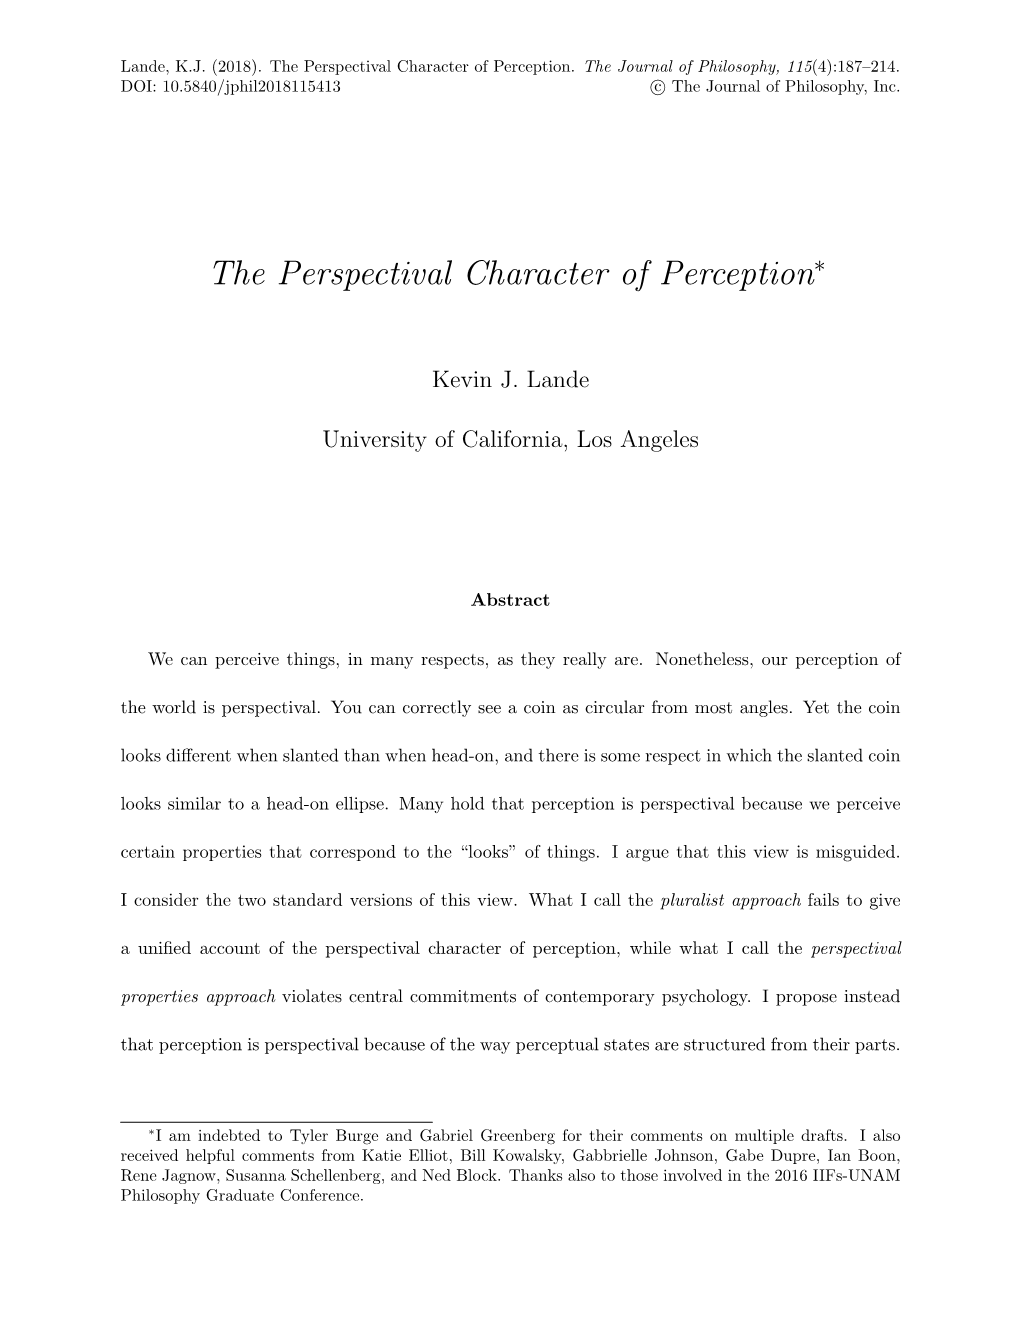 The Perspectival Character of Perception